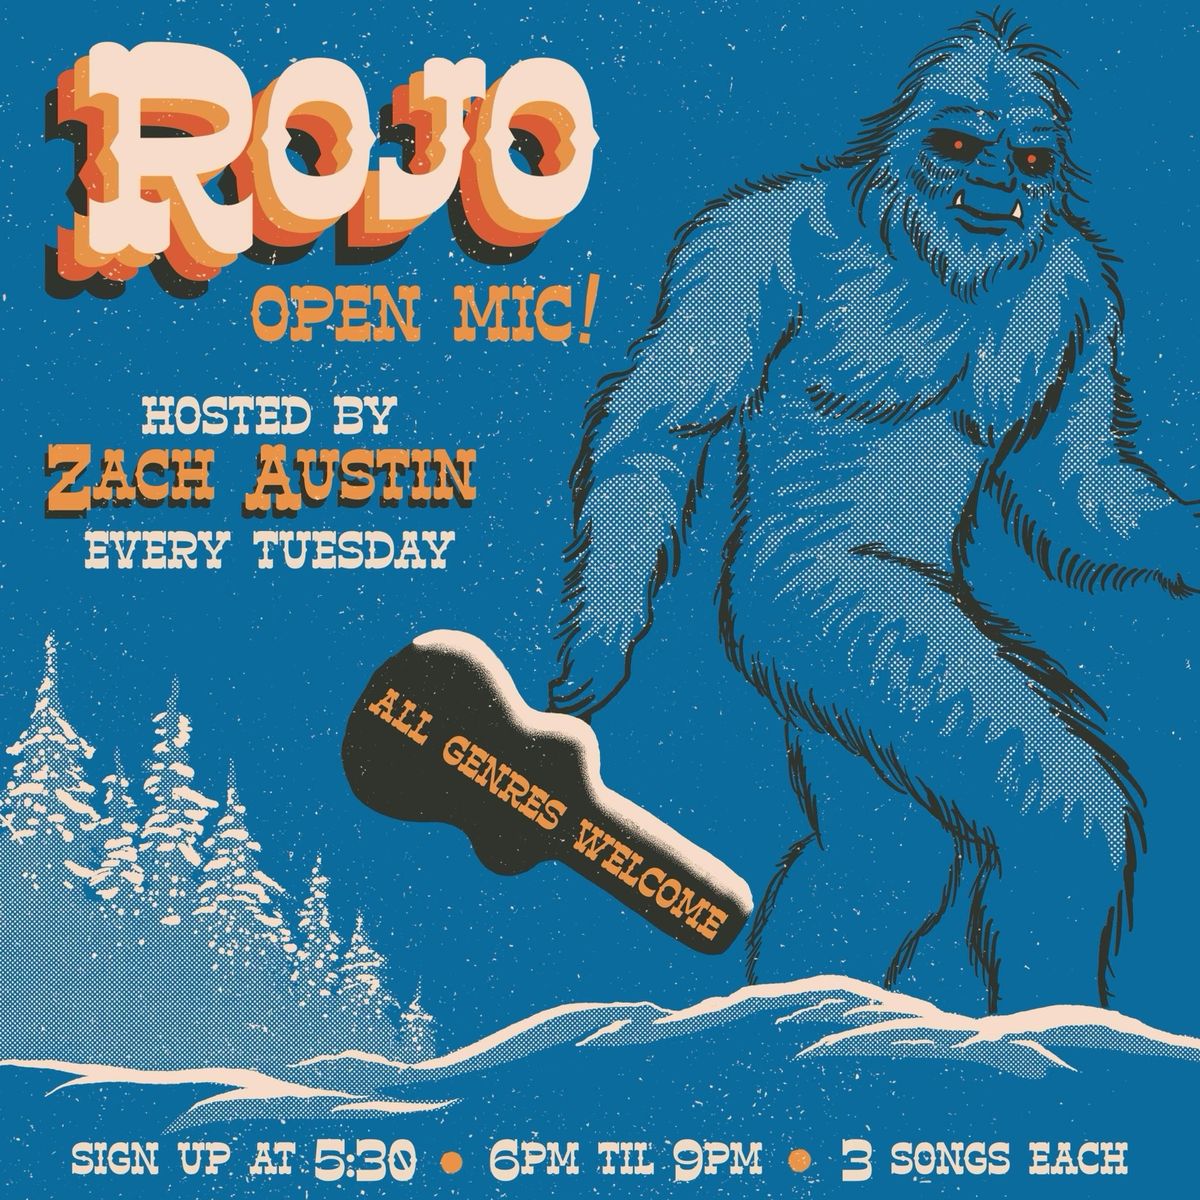 Tuesday Open Mic Music at Rojo with Host Zach Austin